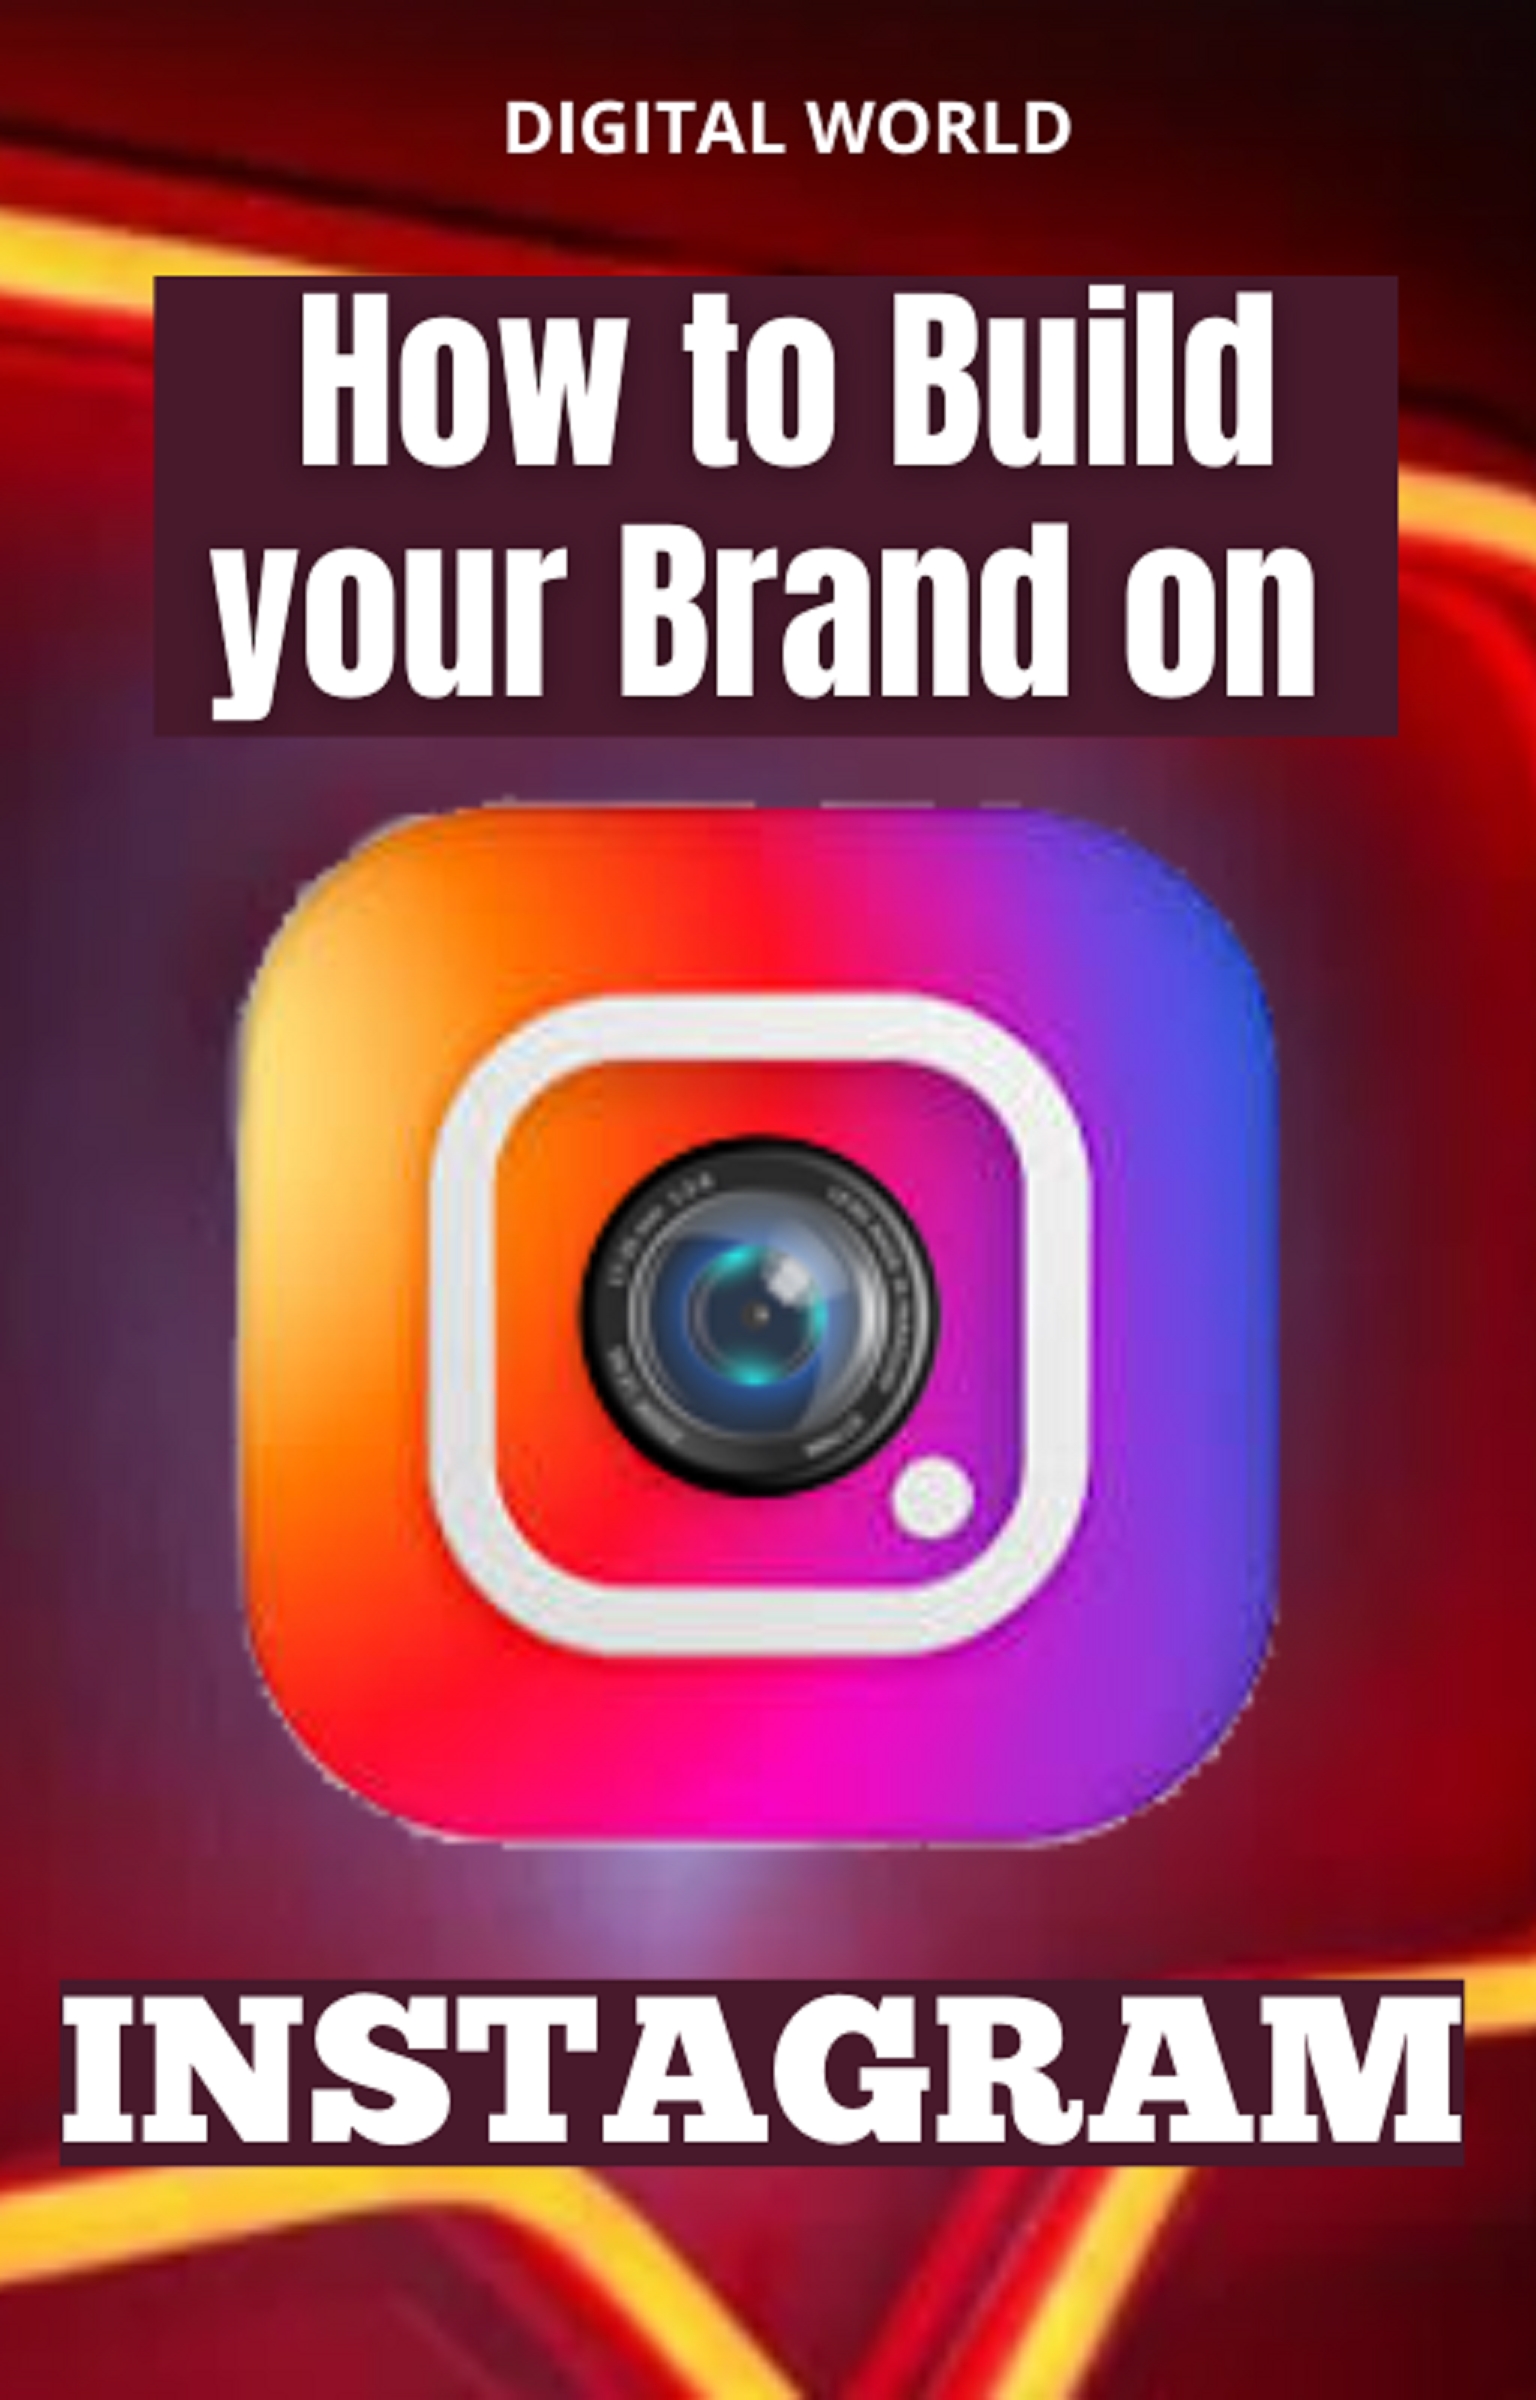 How to Build your Brand on INSTAGRAM